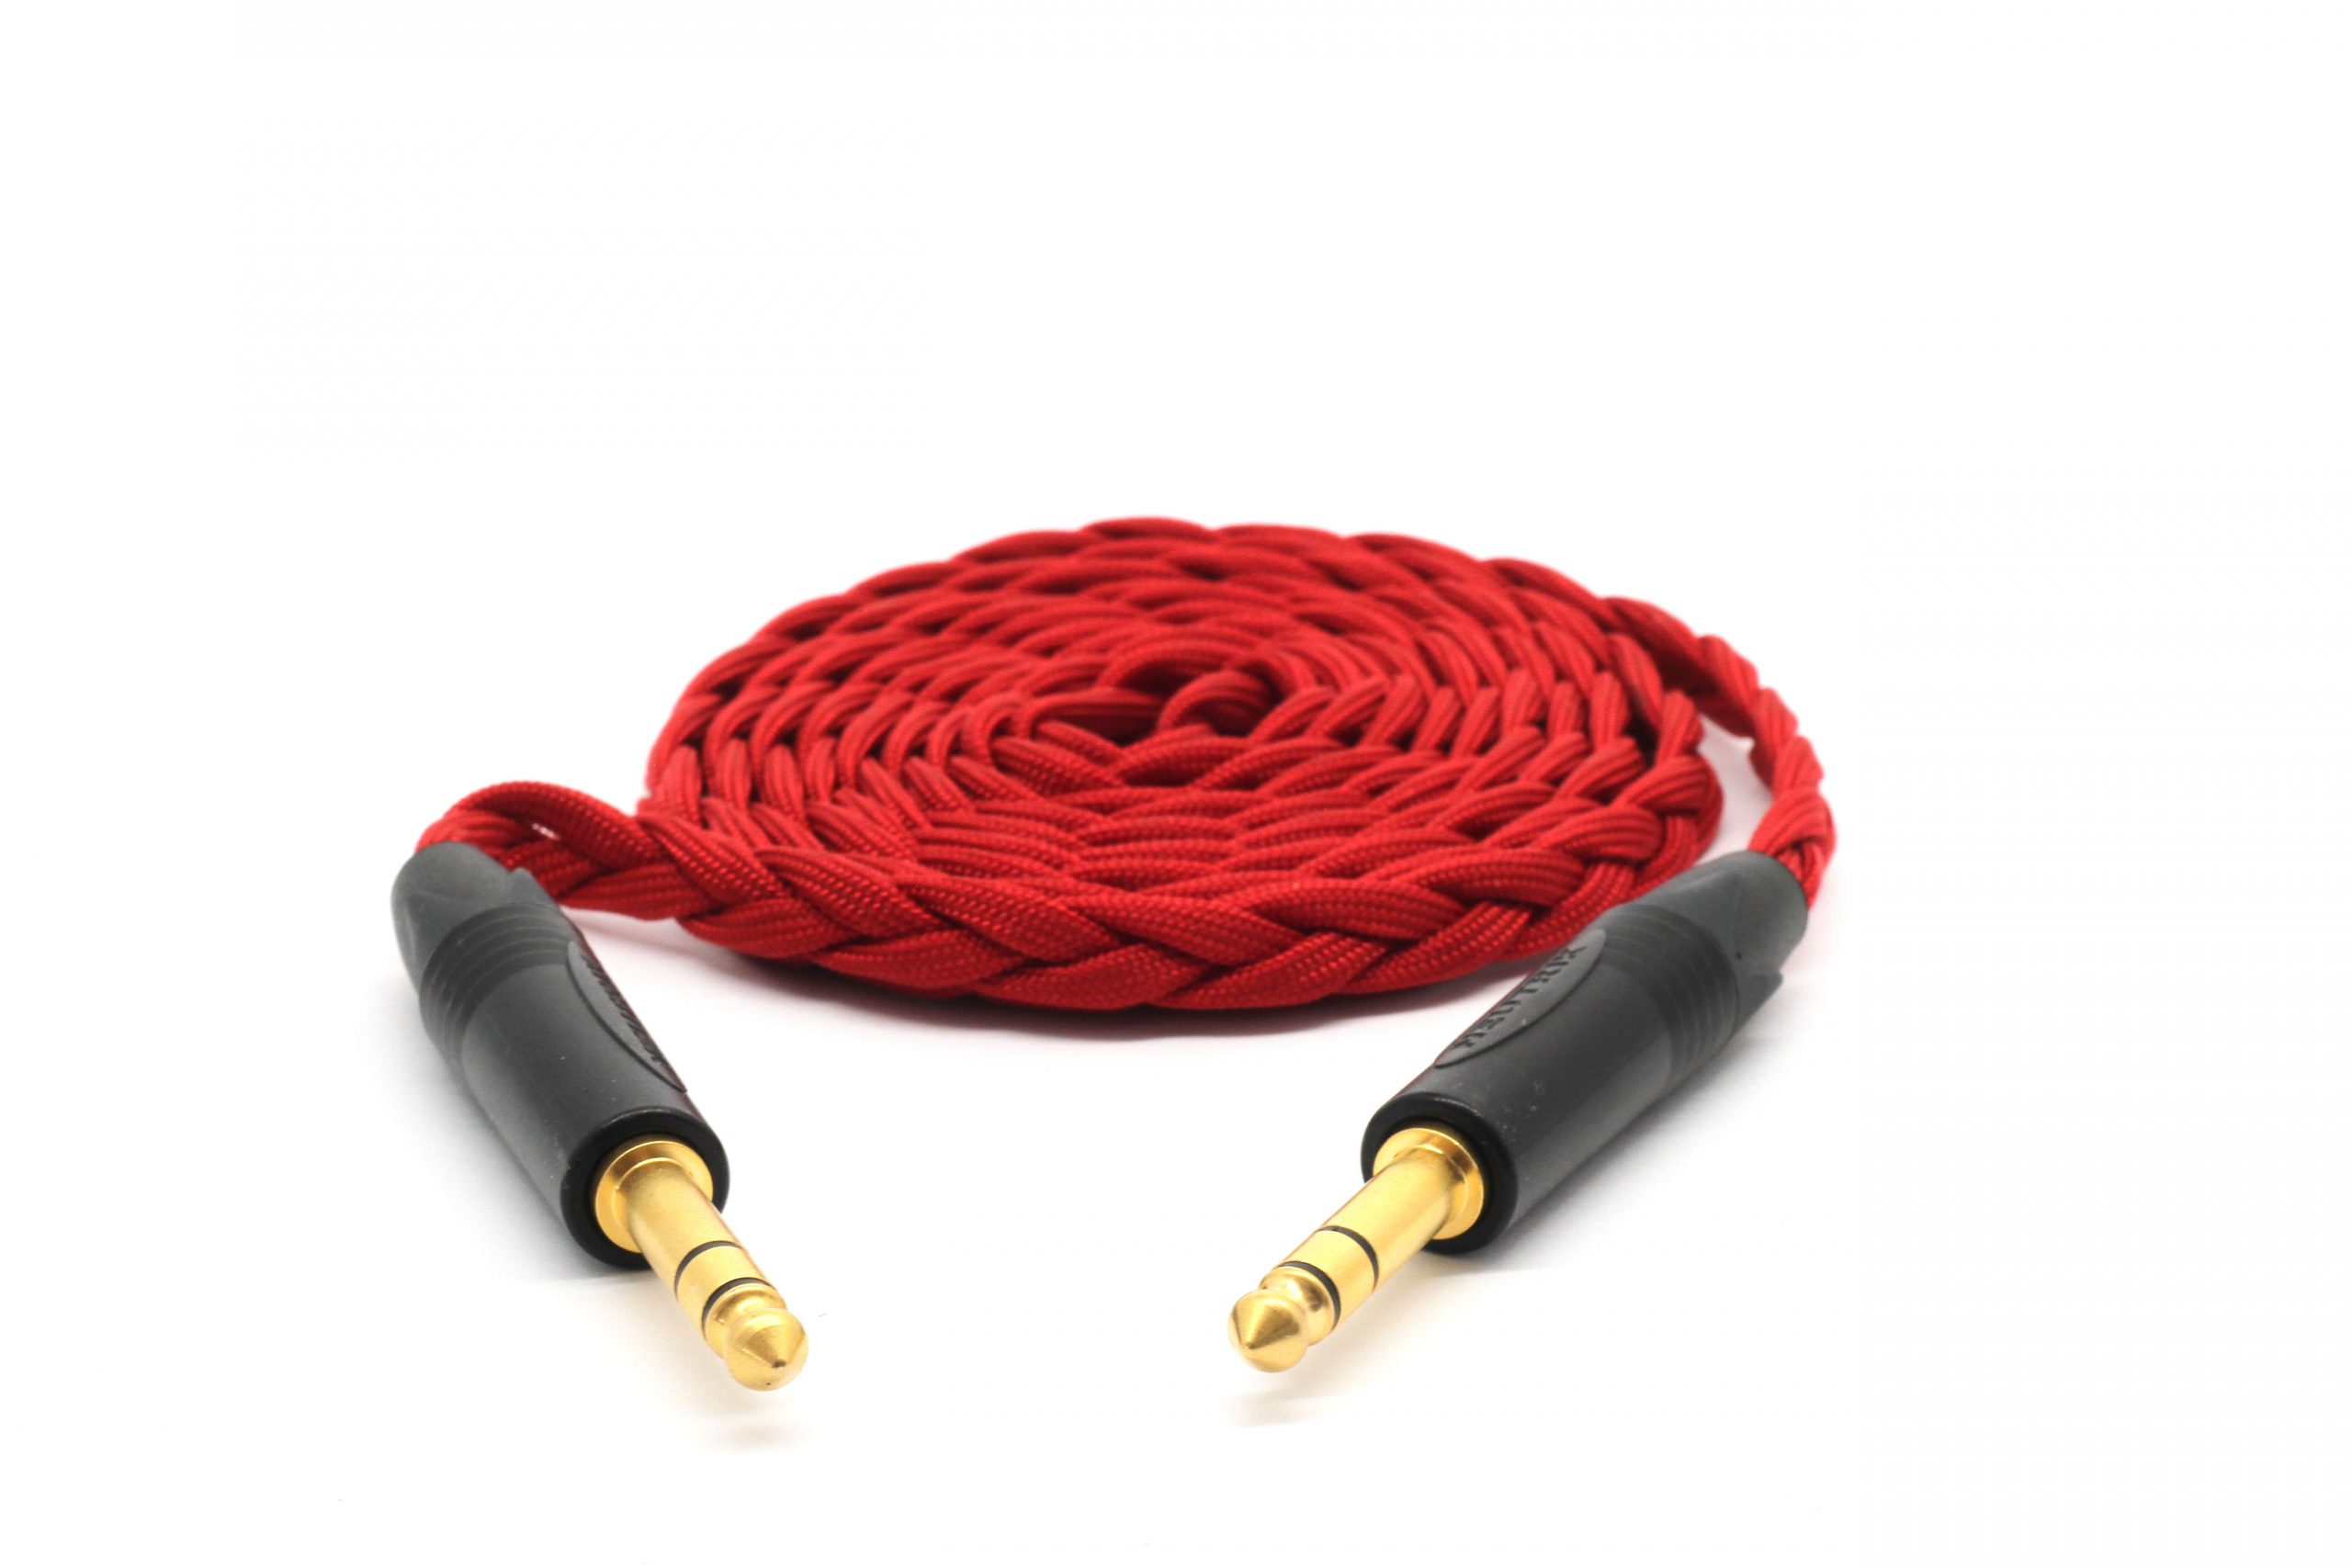 Ultra-low capacitance Headphone Extension or Patch Cable - Custom